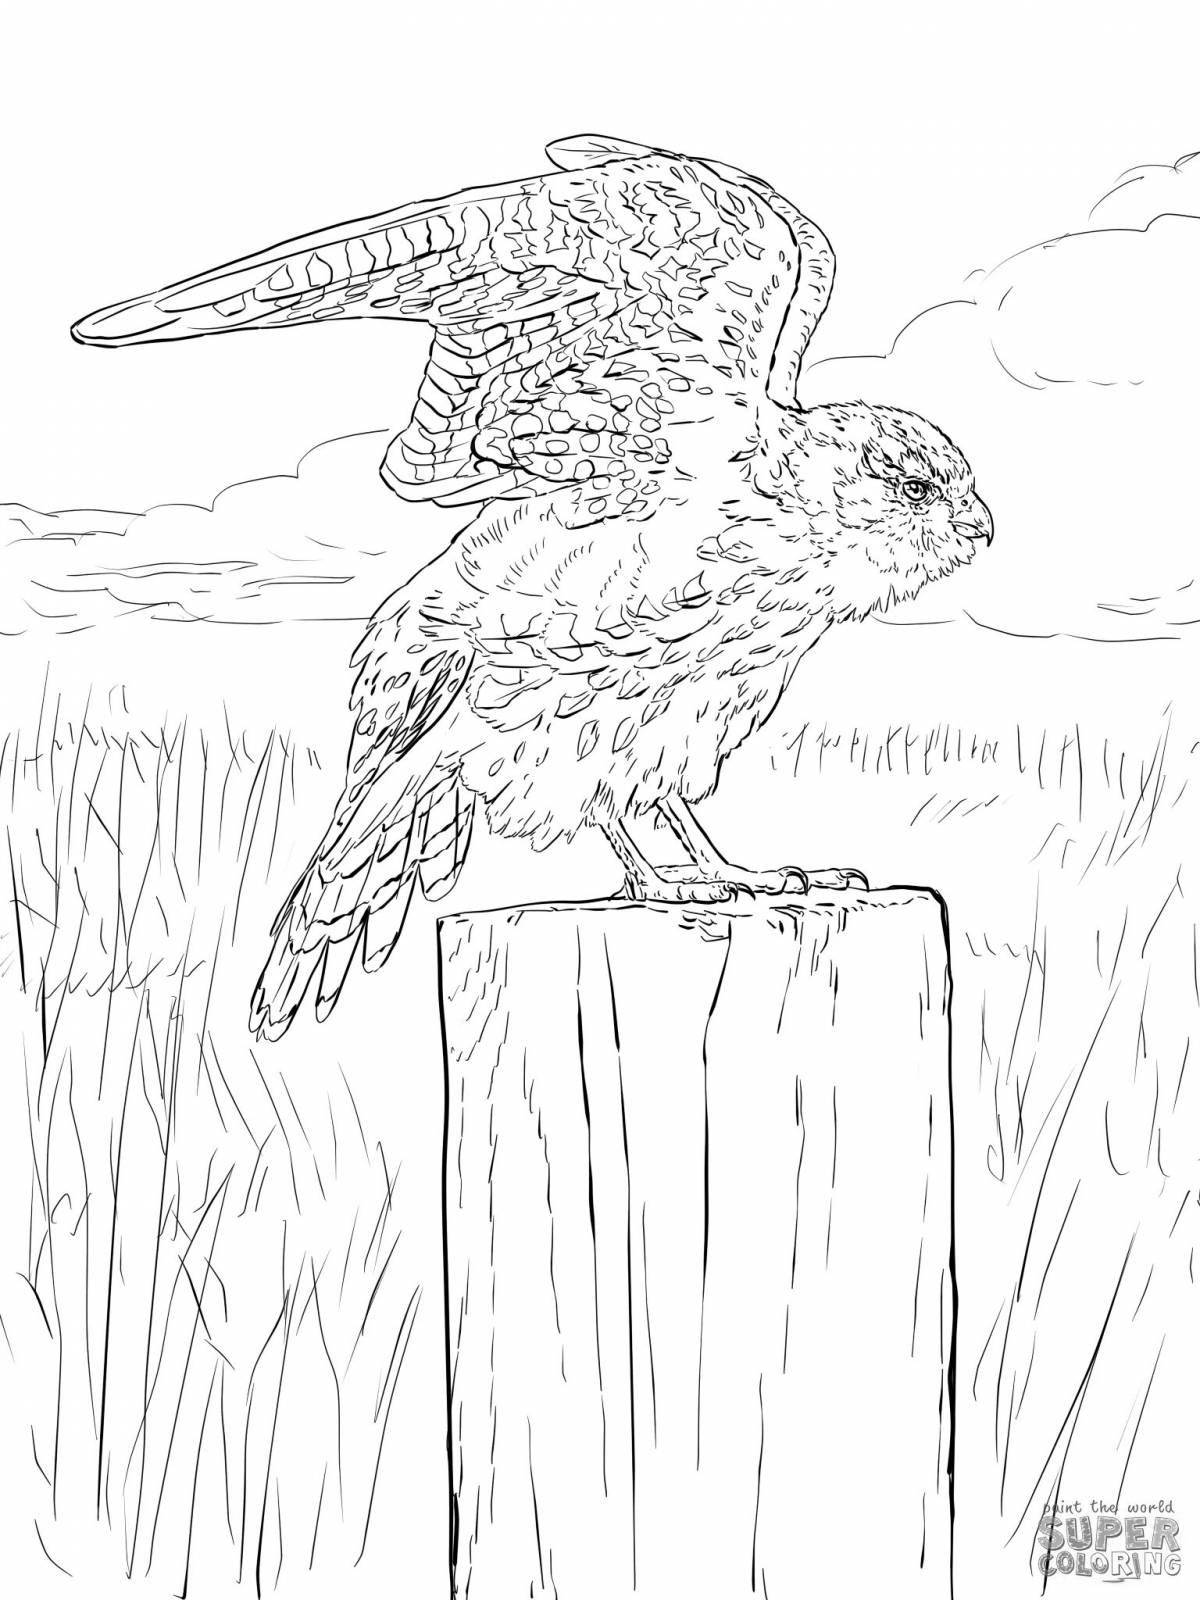 Exalted merlin coloring book